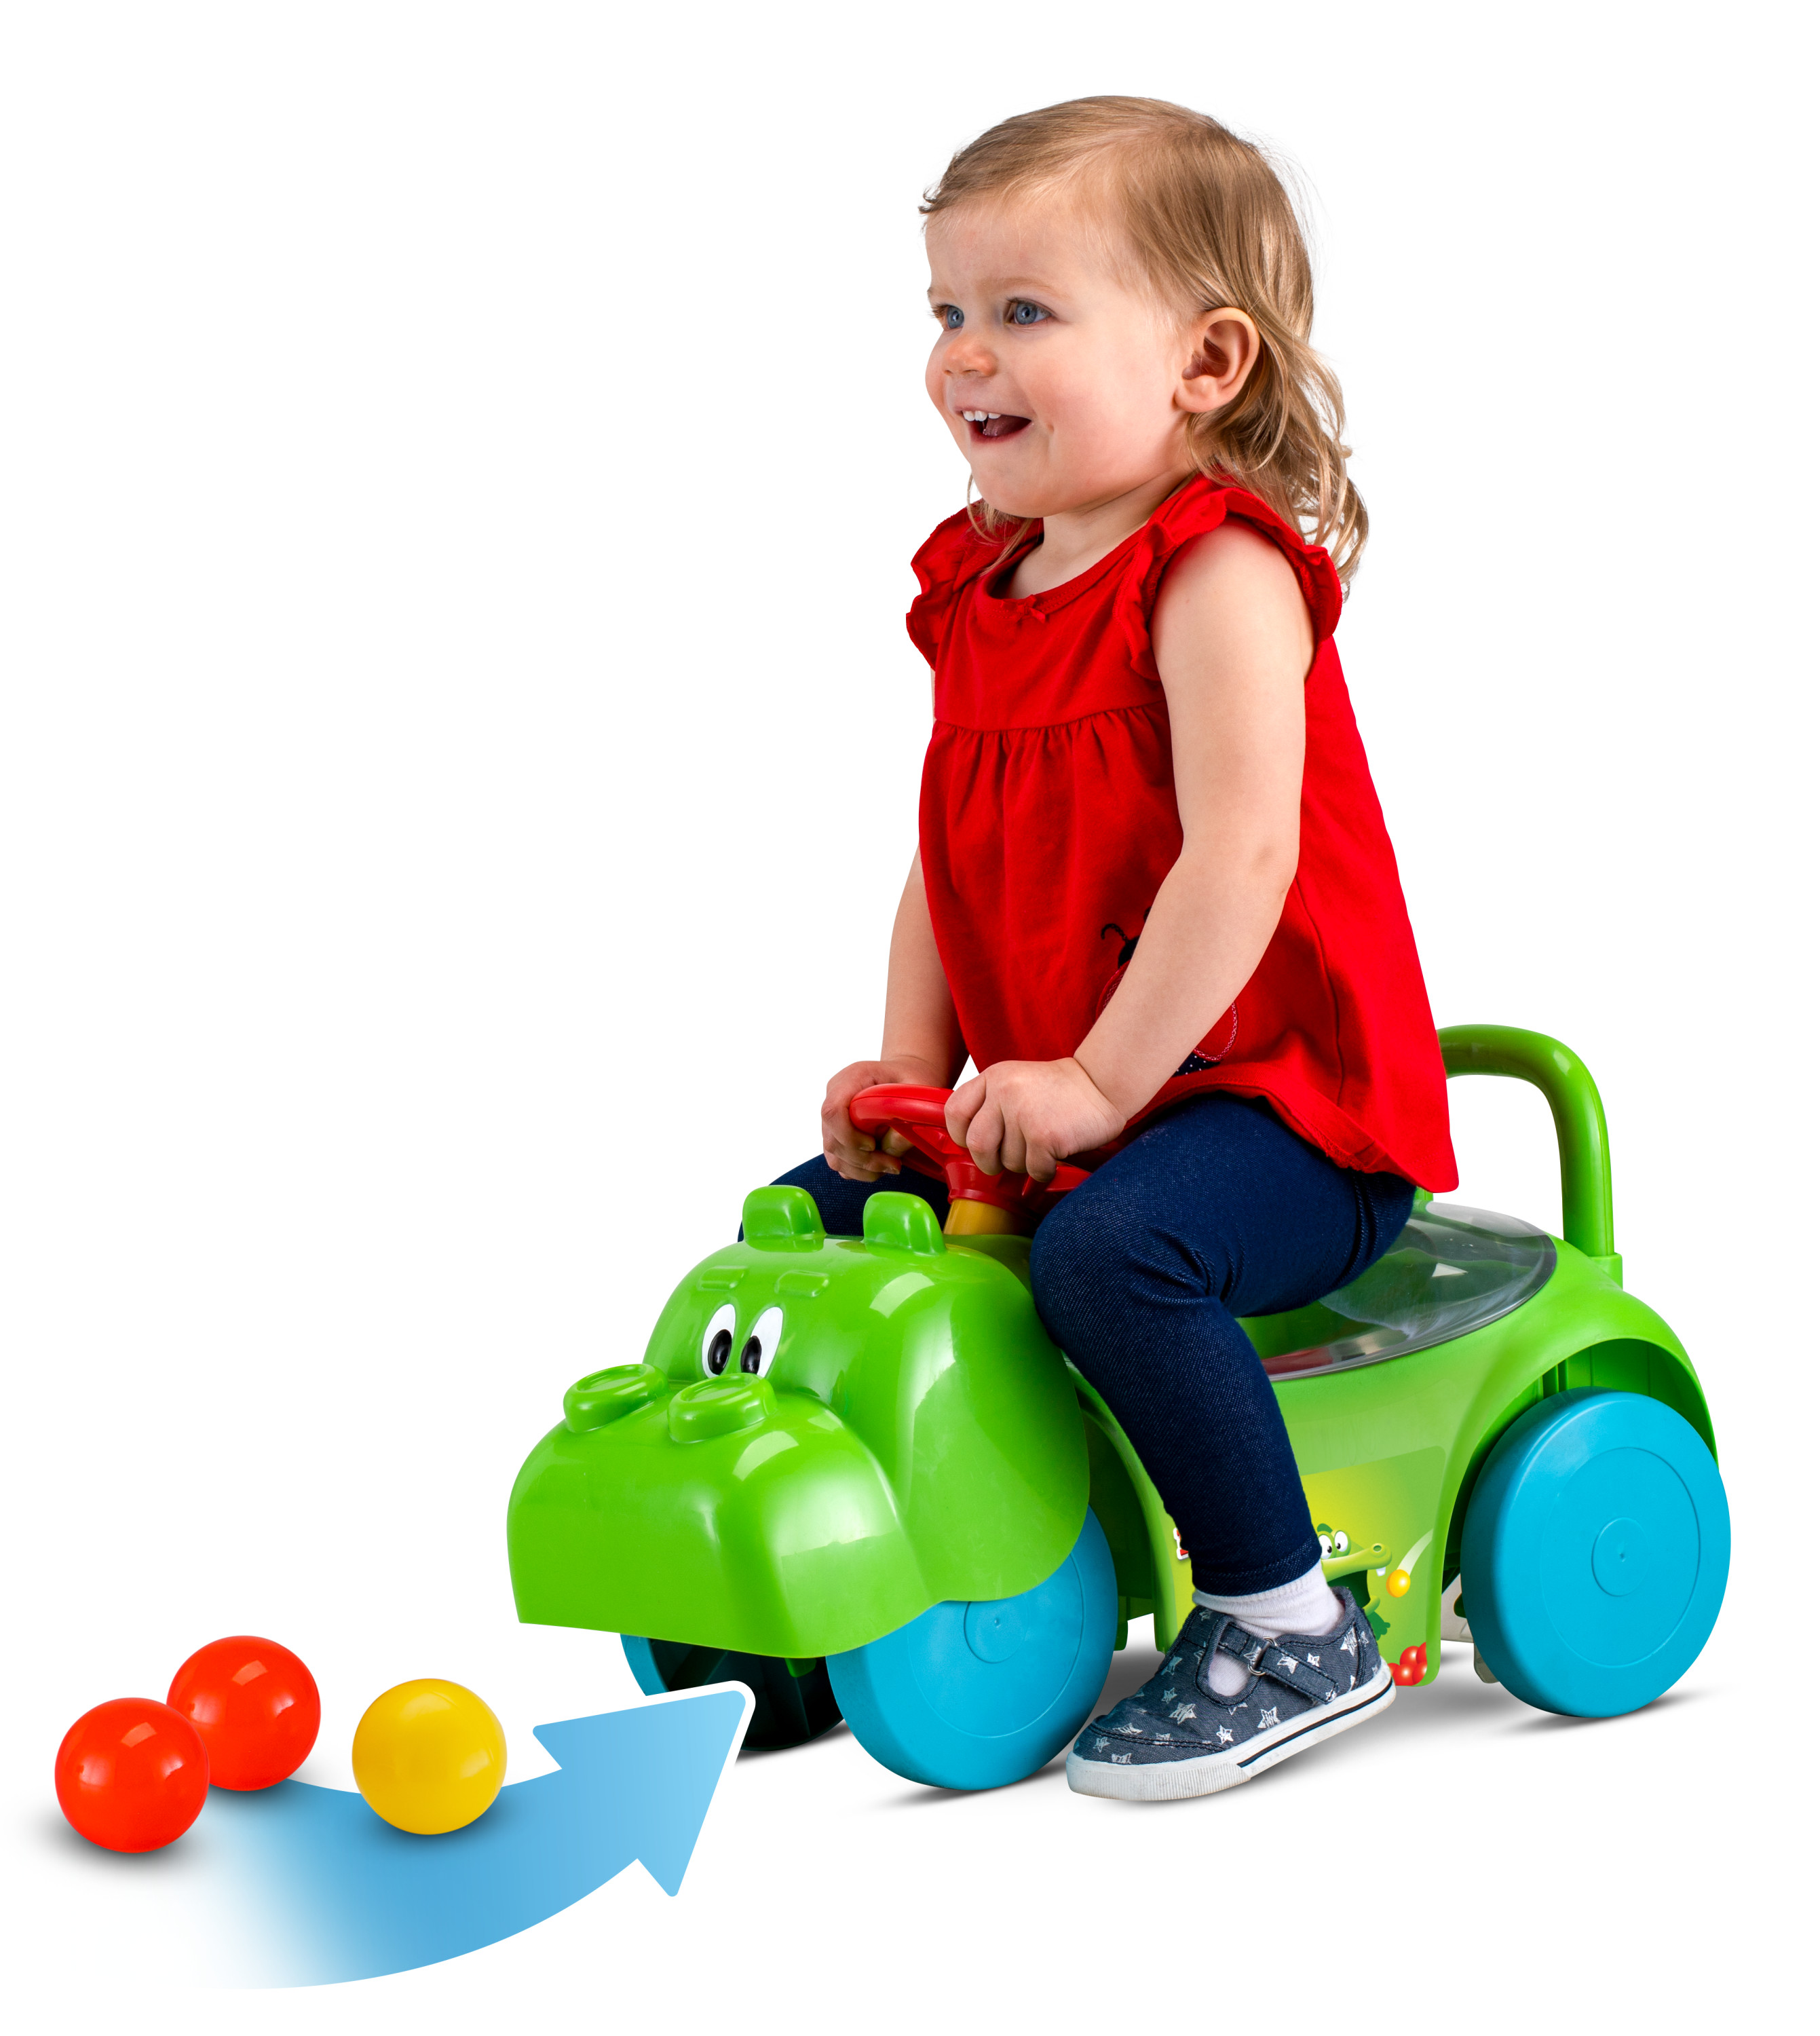 Hasbro Hungry Hungry Hippos 3 in 1 Scoot and Ride On Toy by Kid Trax, Toddler - image 1 of 10